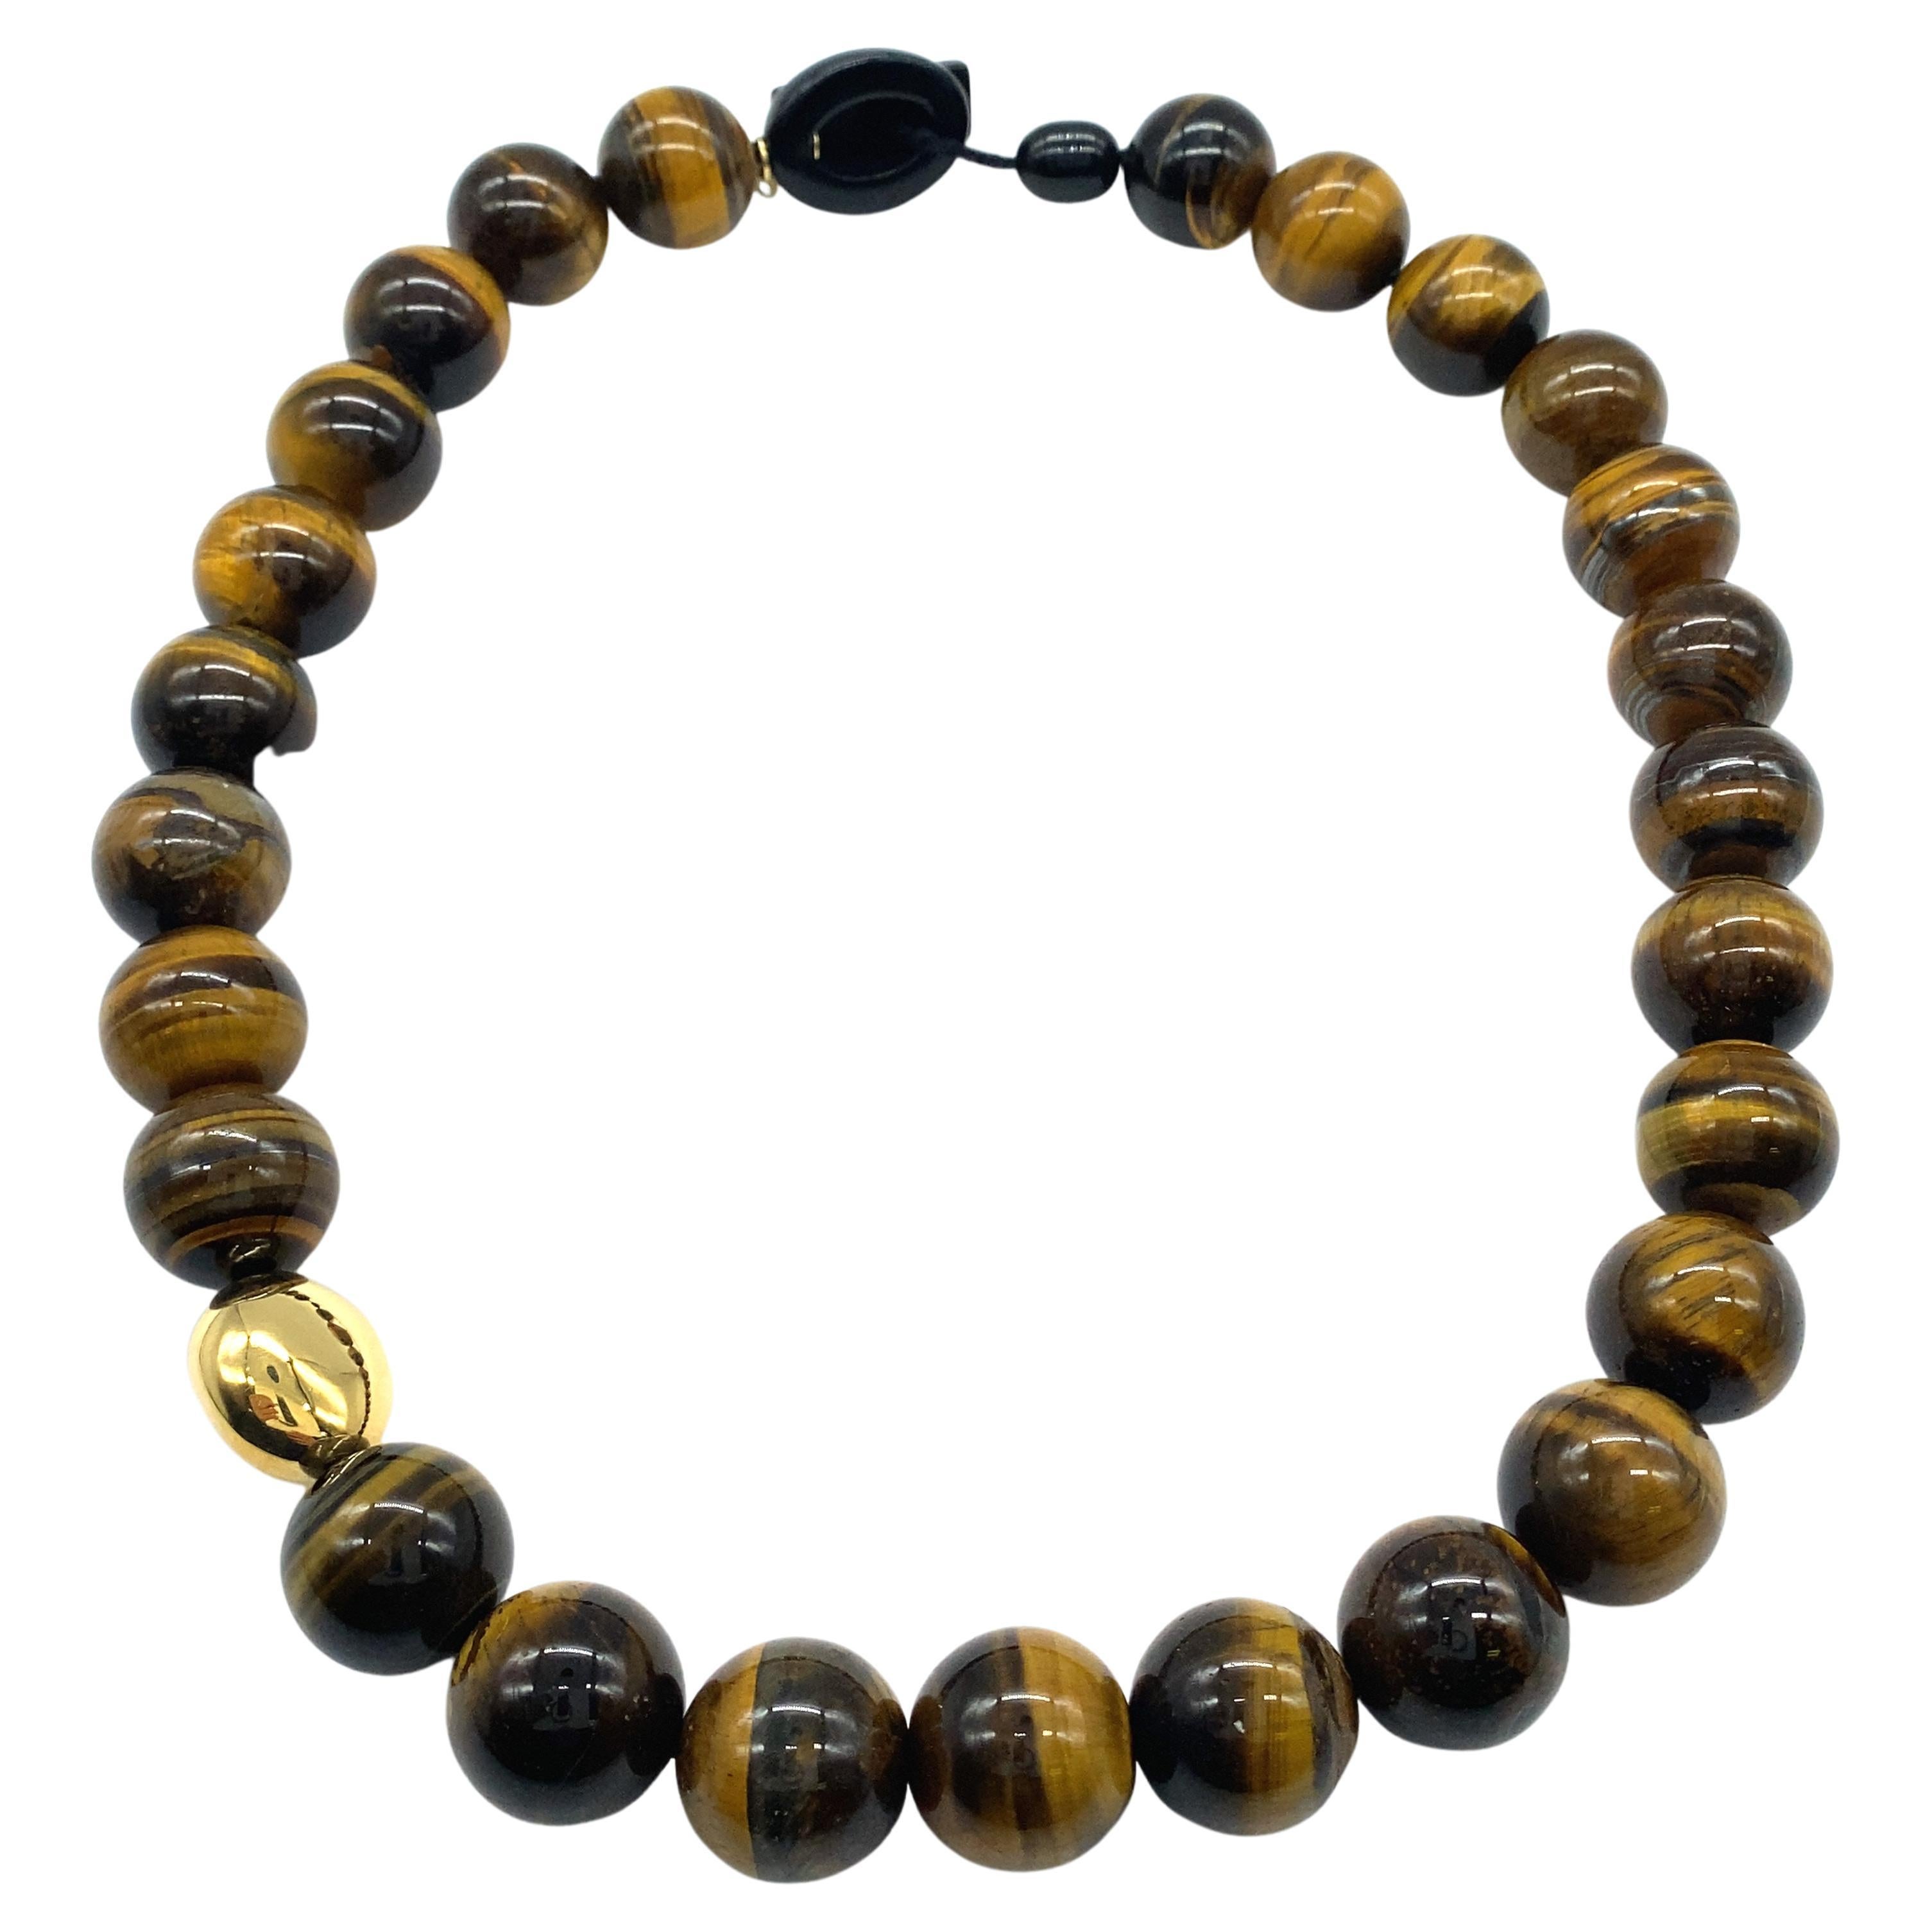 French, Beaded Necklaces with Tiger Eye Stone, Yellow Gold and Bakelite